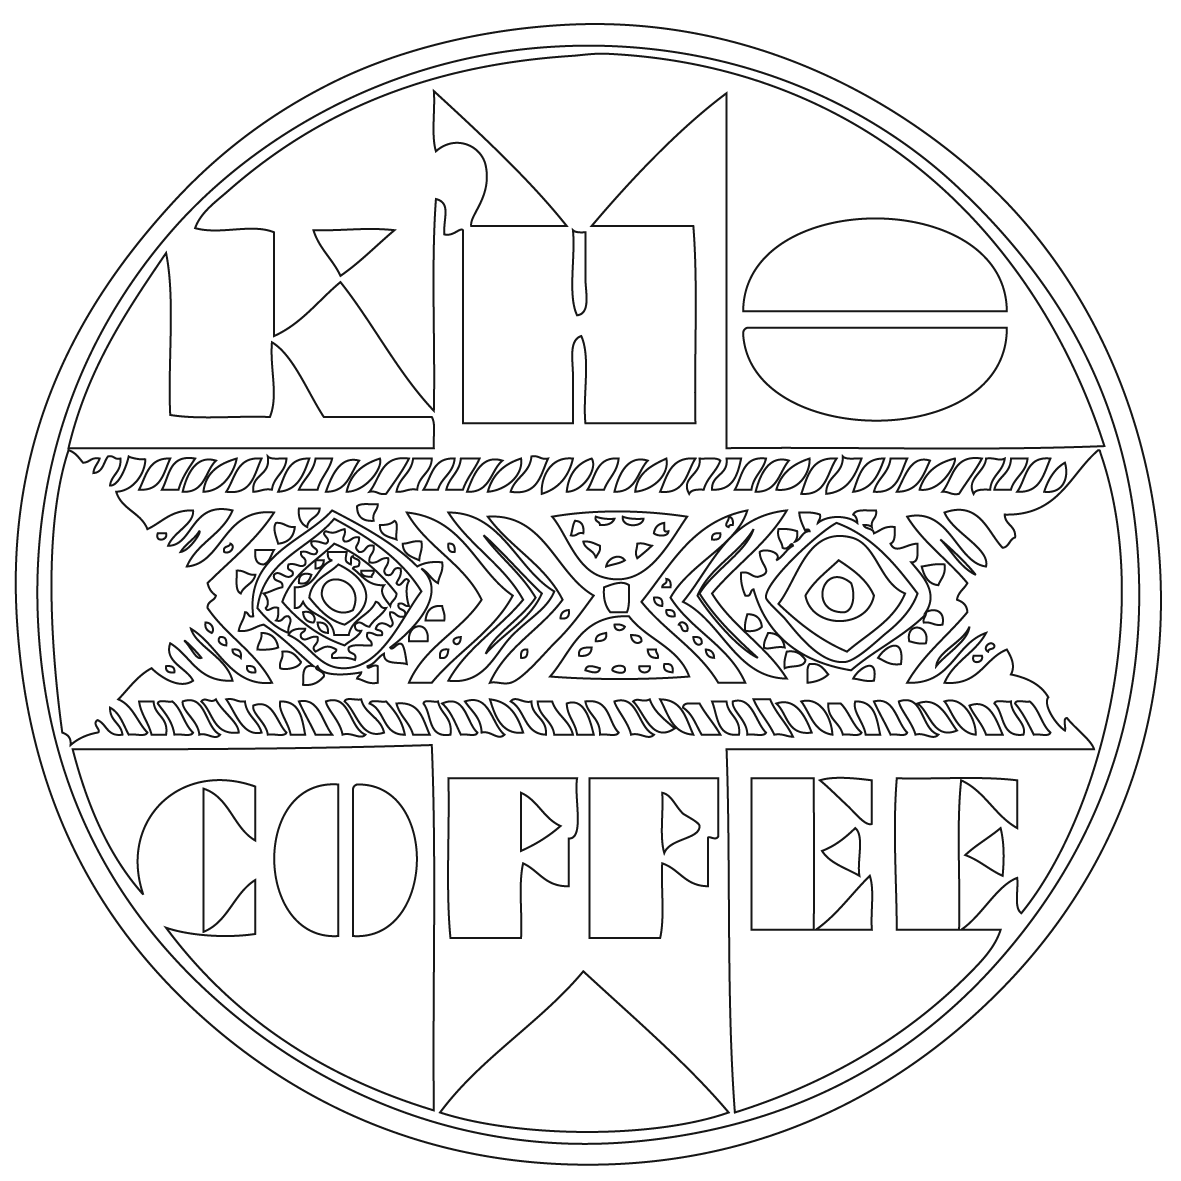 With a Half Circle Mountain Logo - K'Ho Coffee, The Montagnards, a group of ethnic minority K'Ho tribes ...